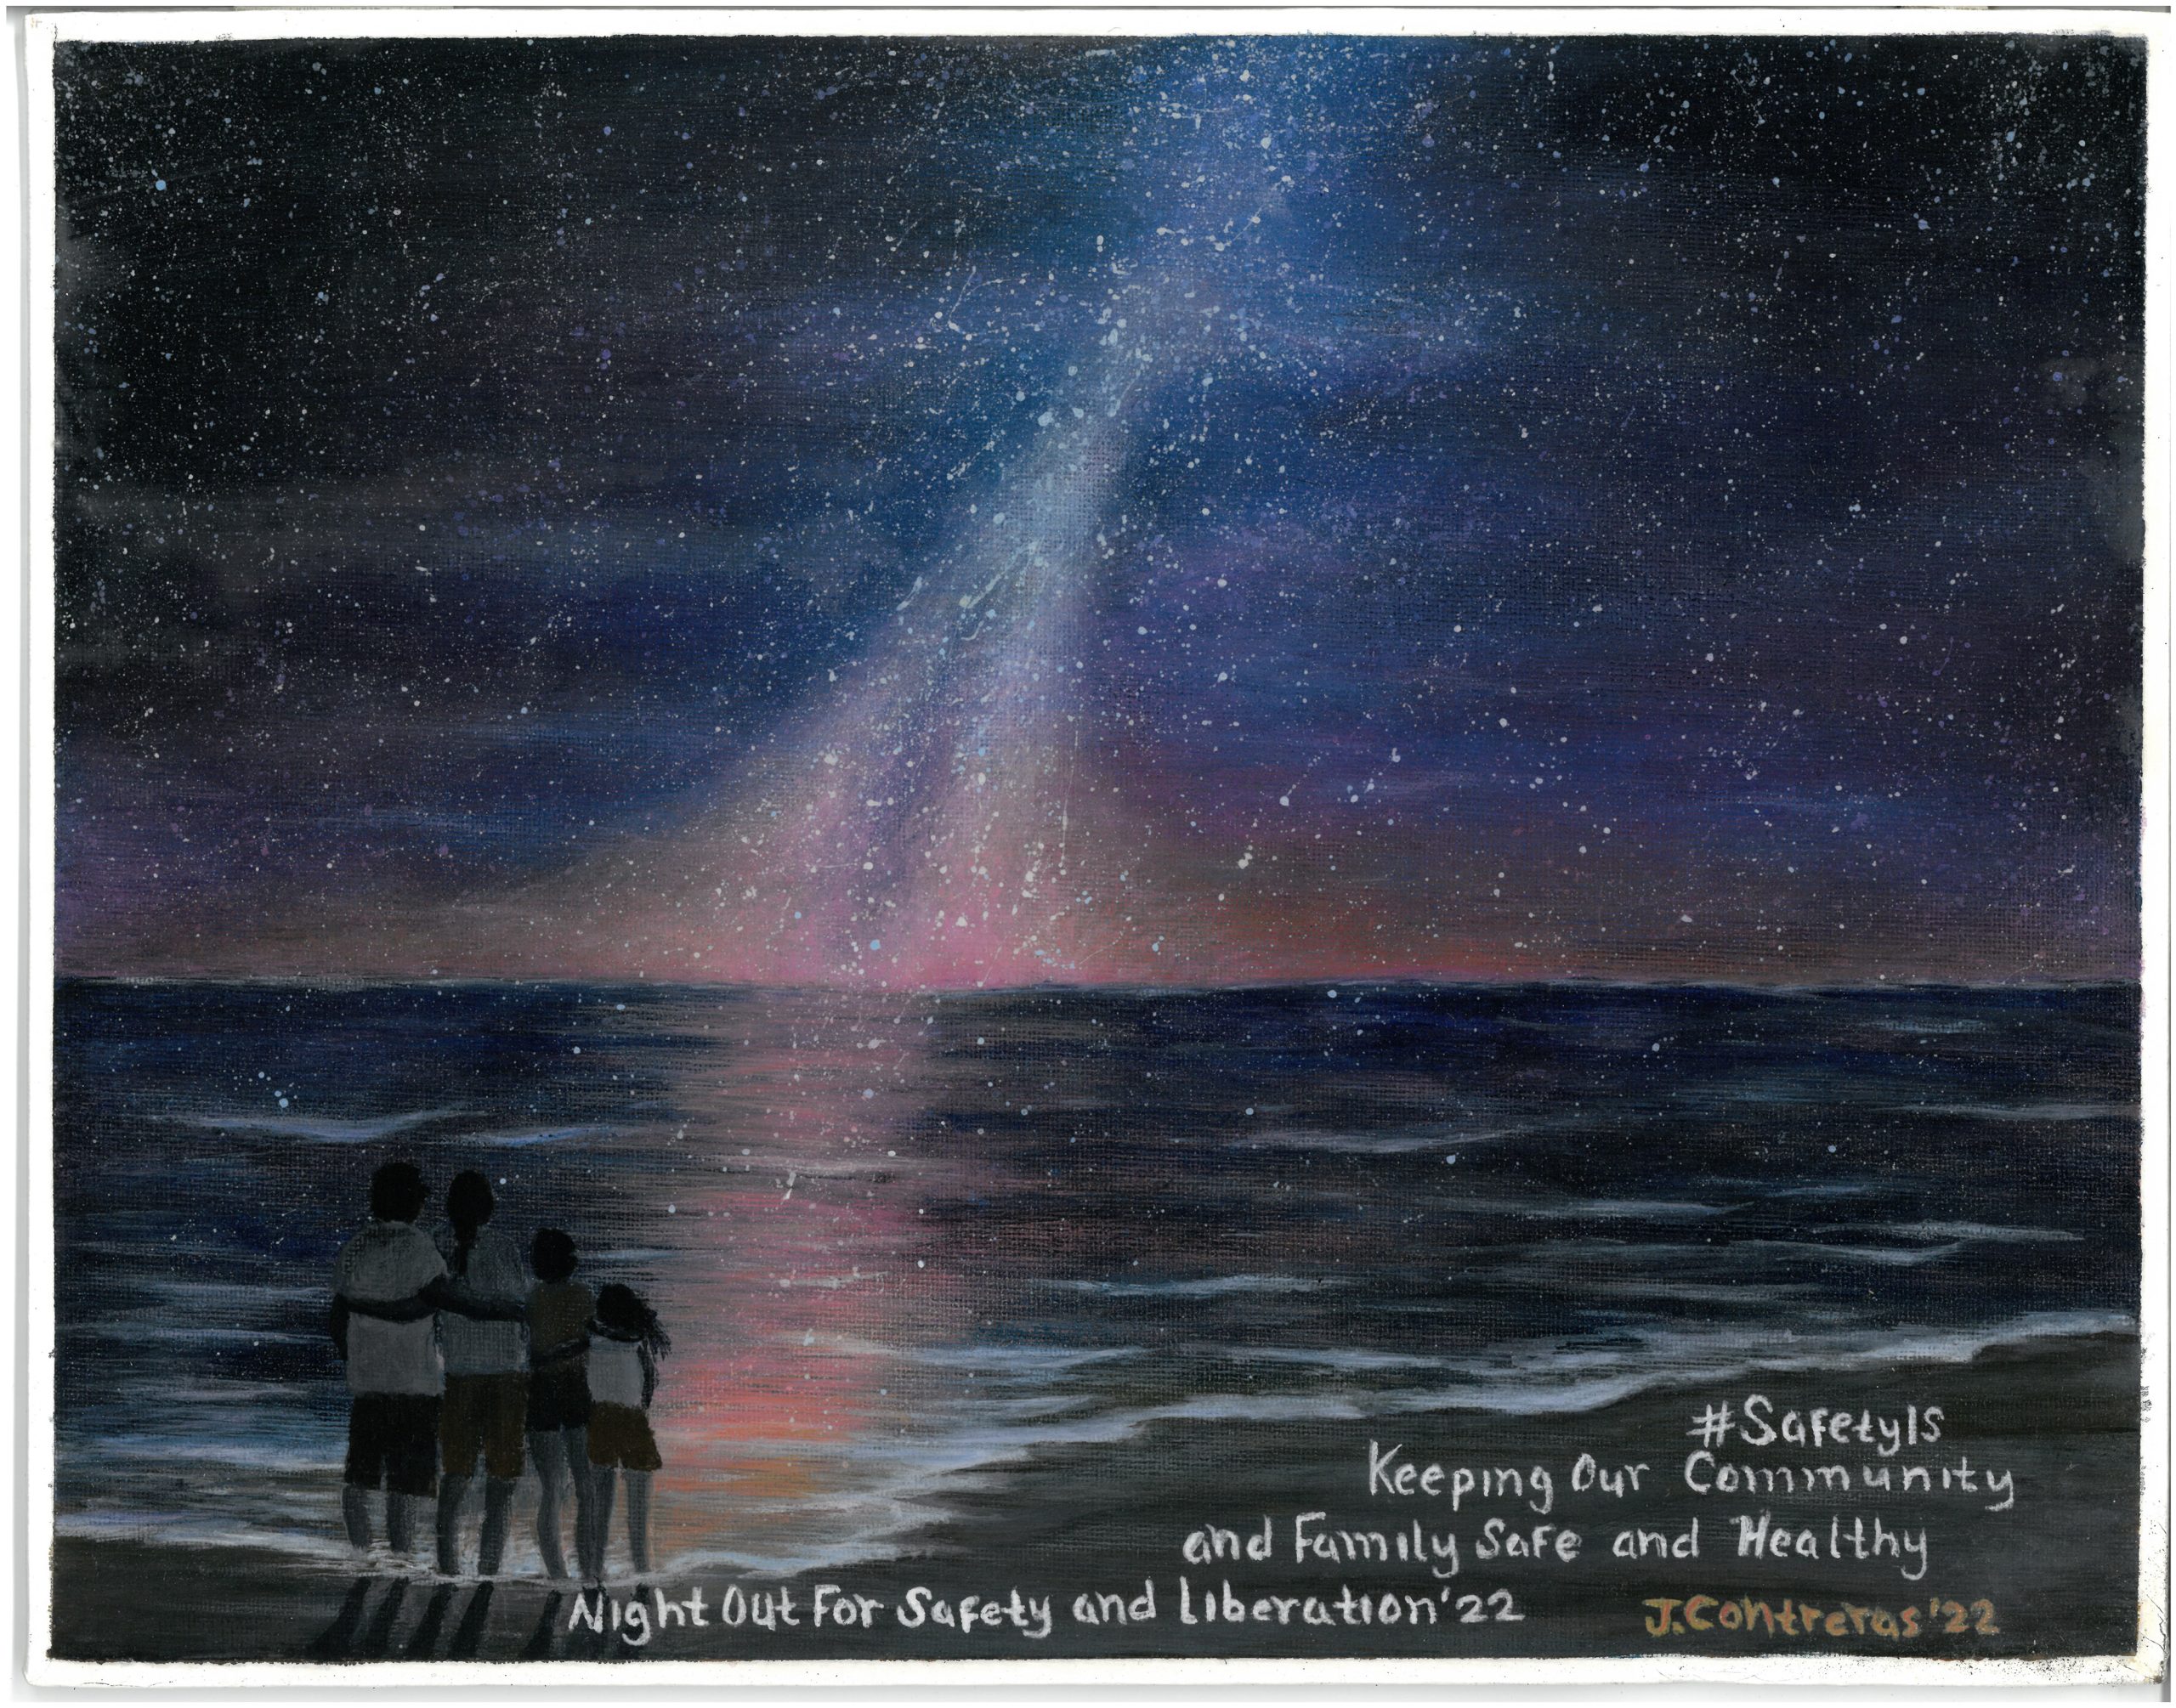 A family stands with arms around each others' shoulders on a shore looking out over the water at a starry nighttime sky suffused with glowing light, in oil on CDCR-paper.